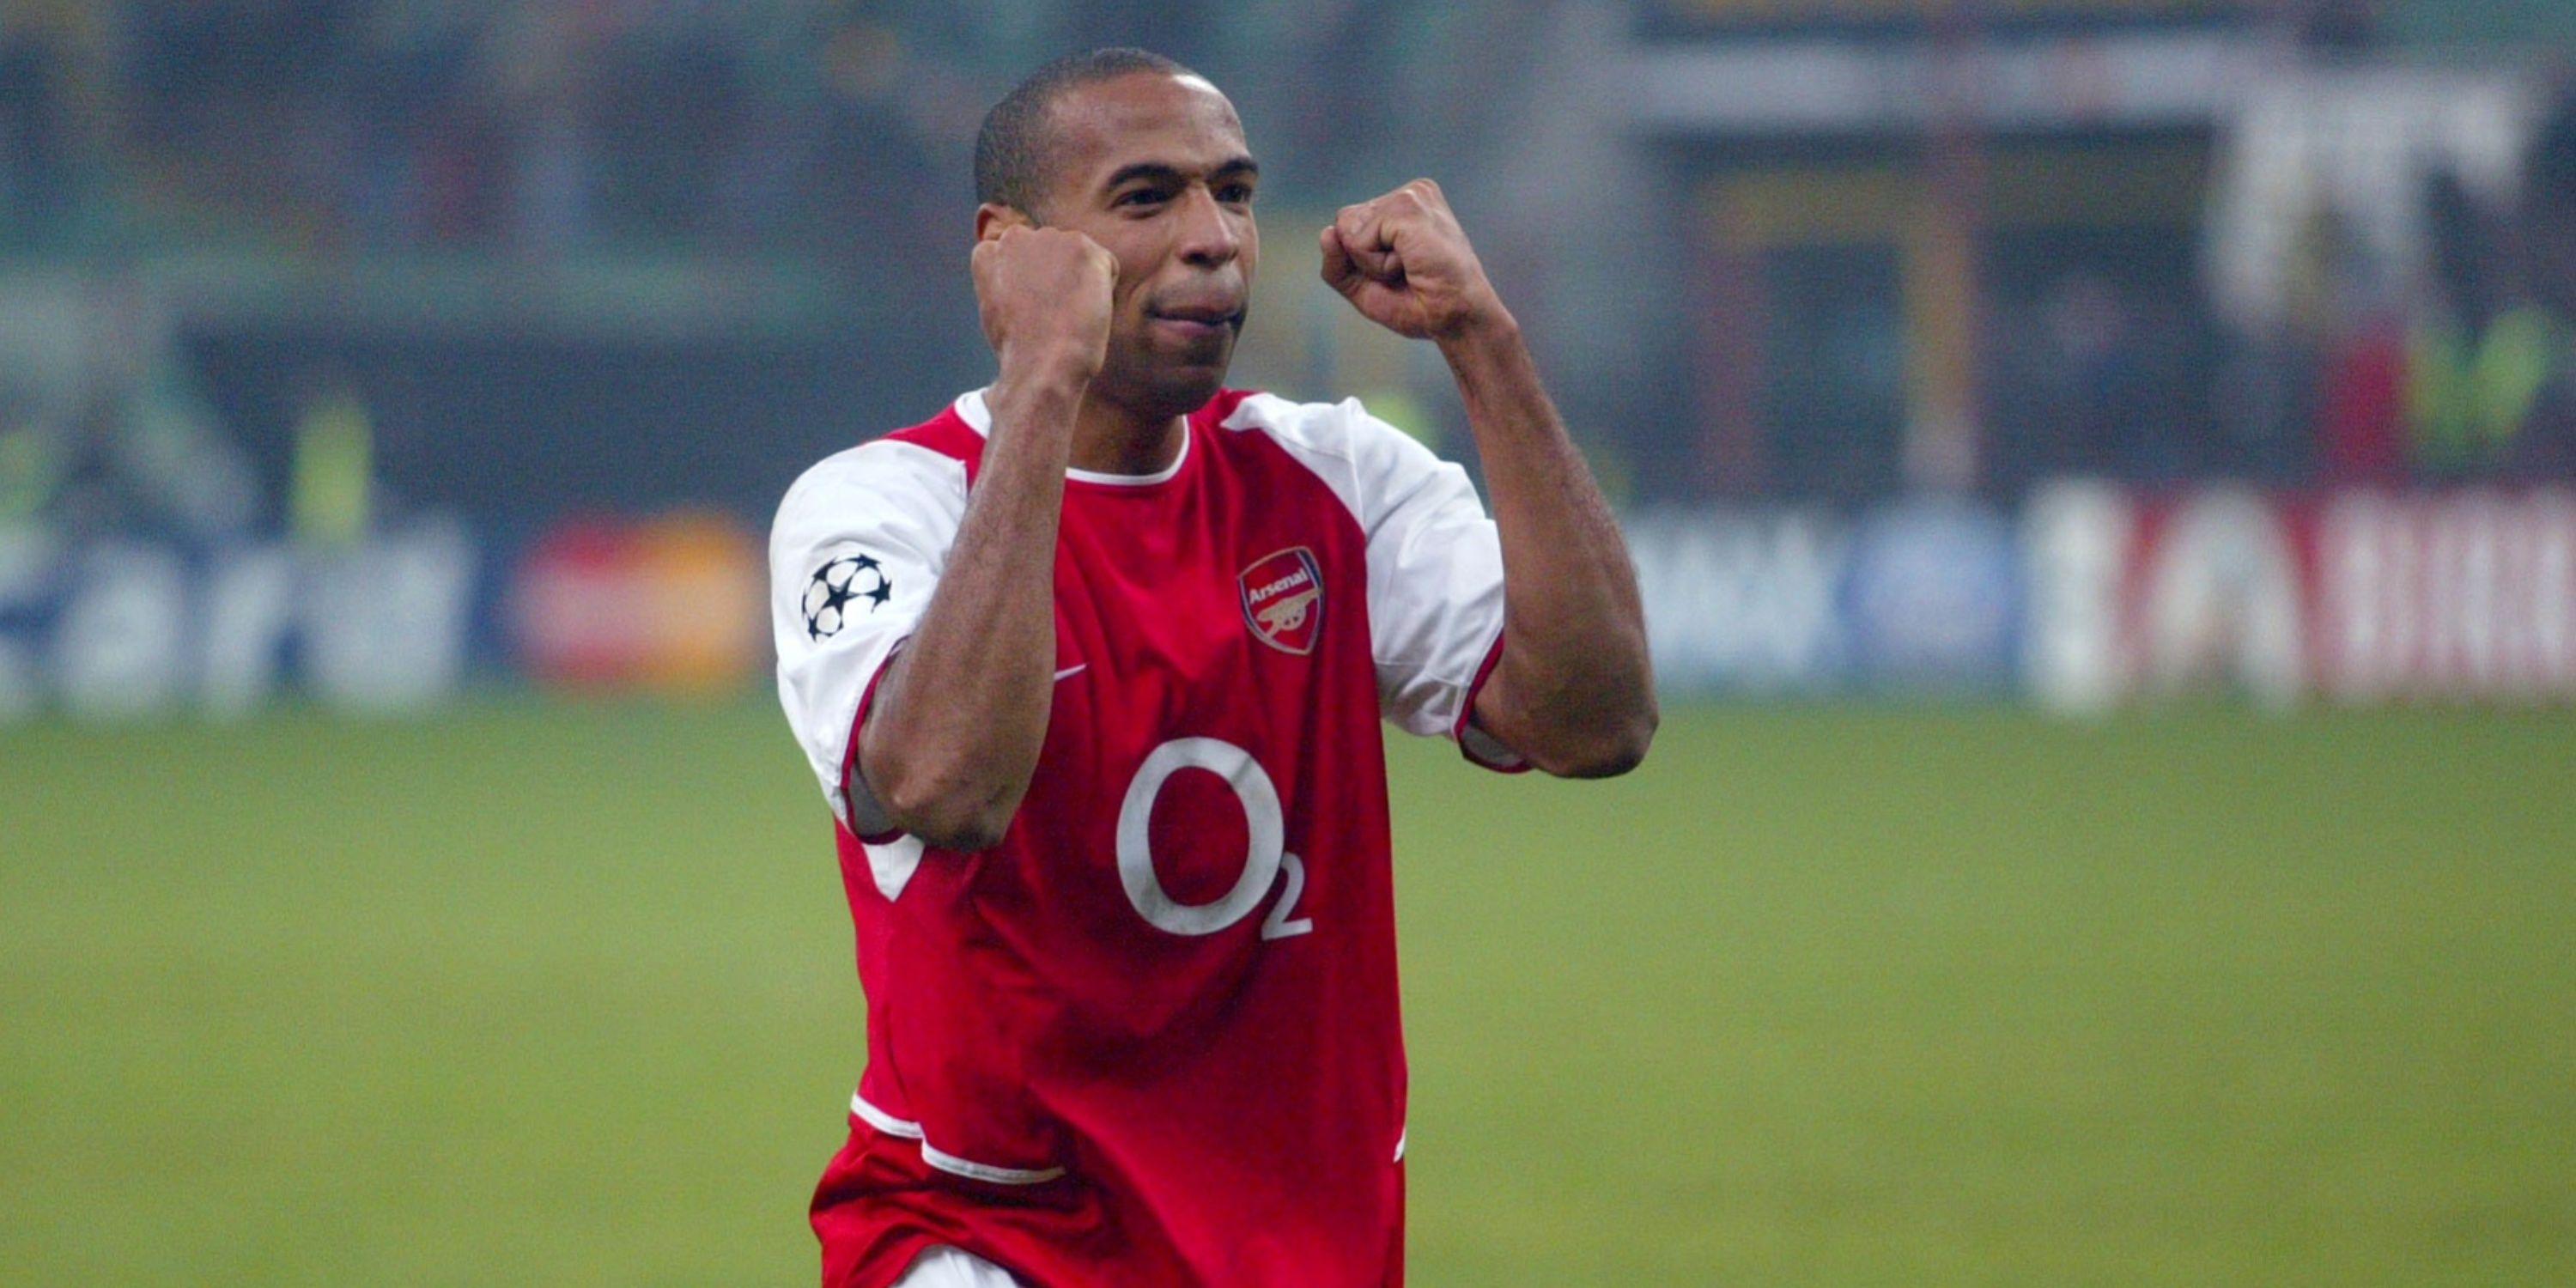 Thierry Henry celebrating for Arsenal.